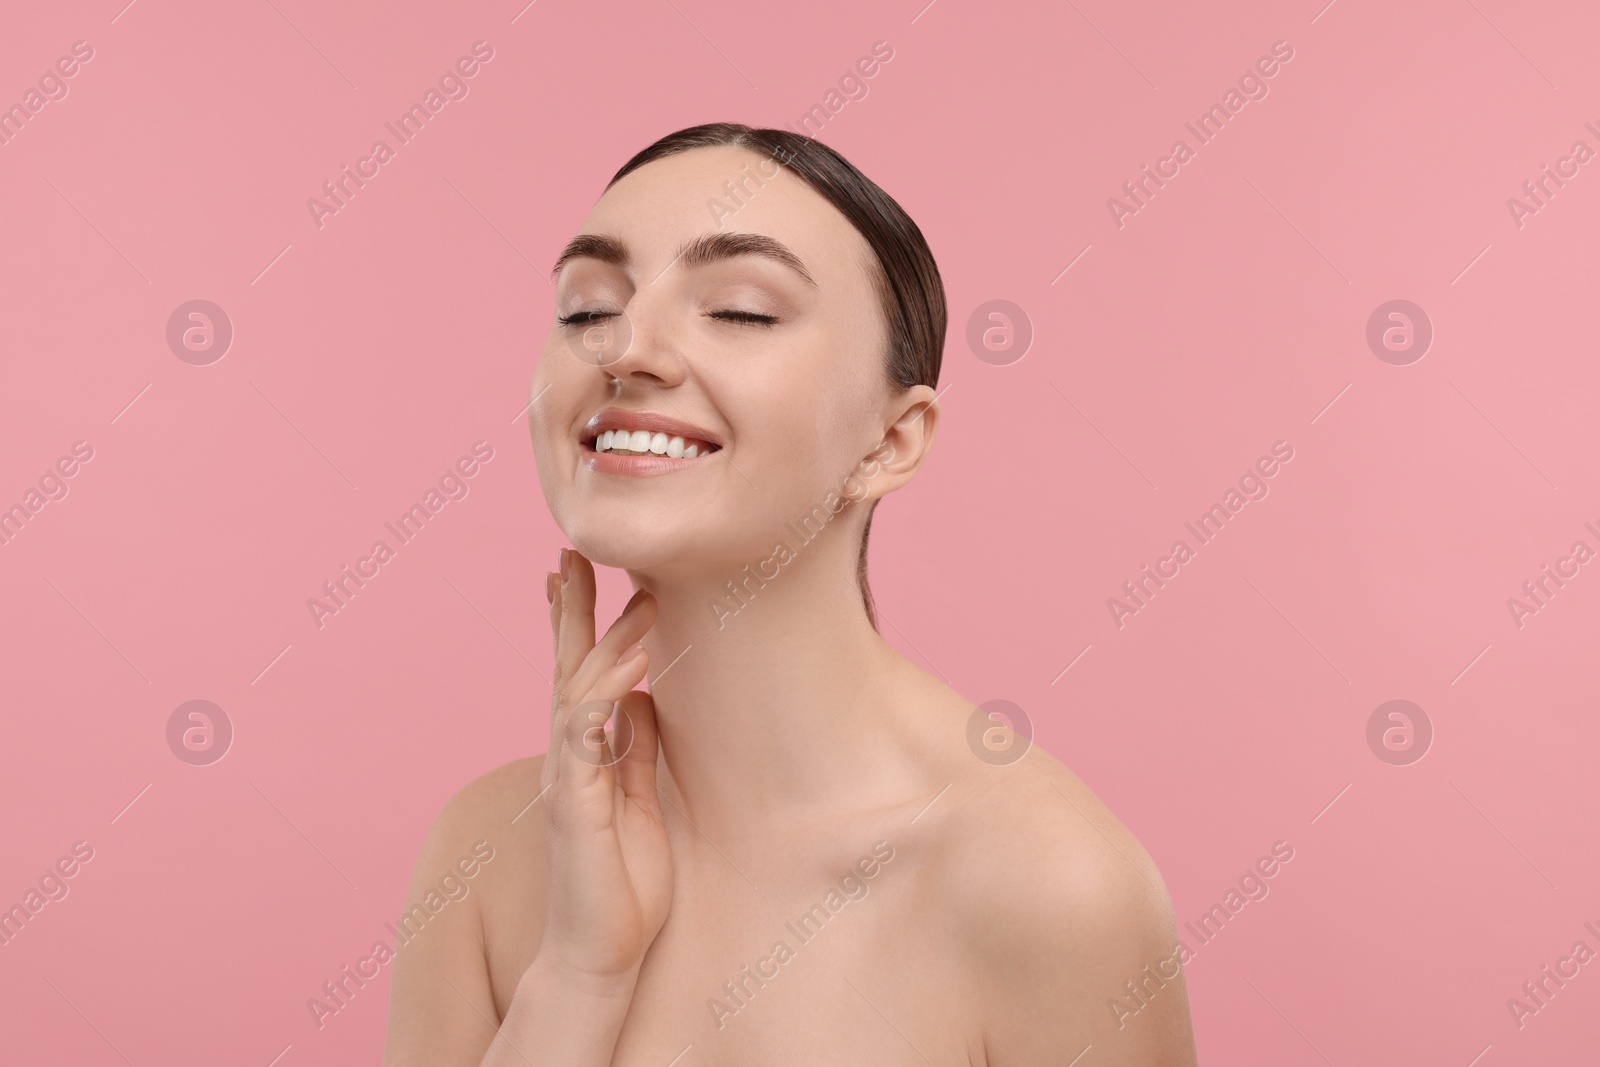 Photo of Smiling woman touching her neck on pink background